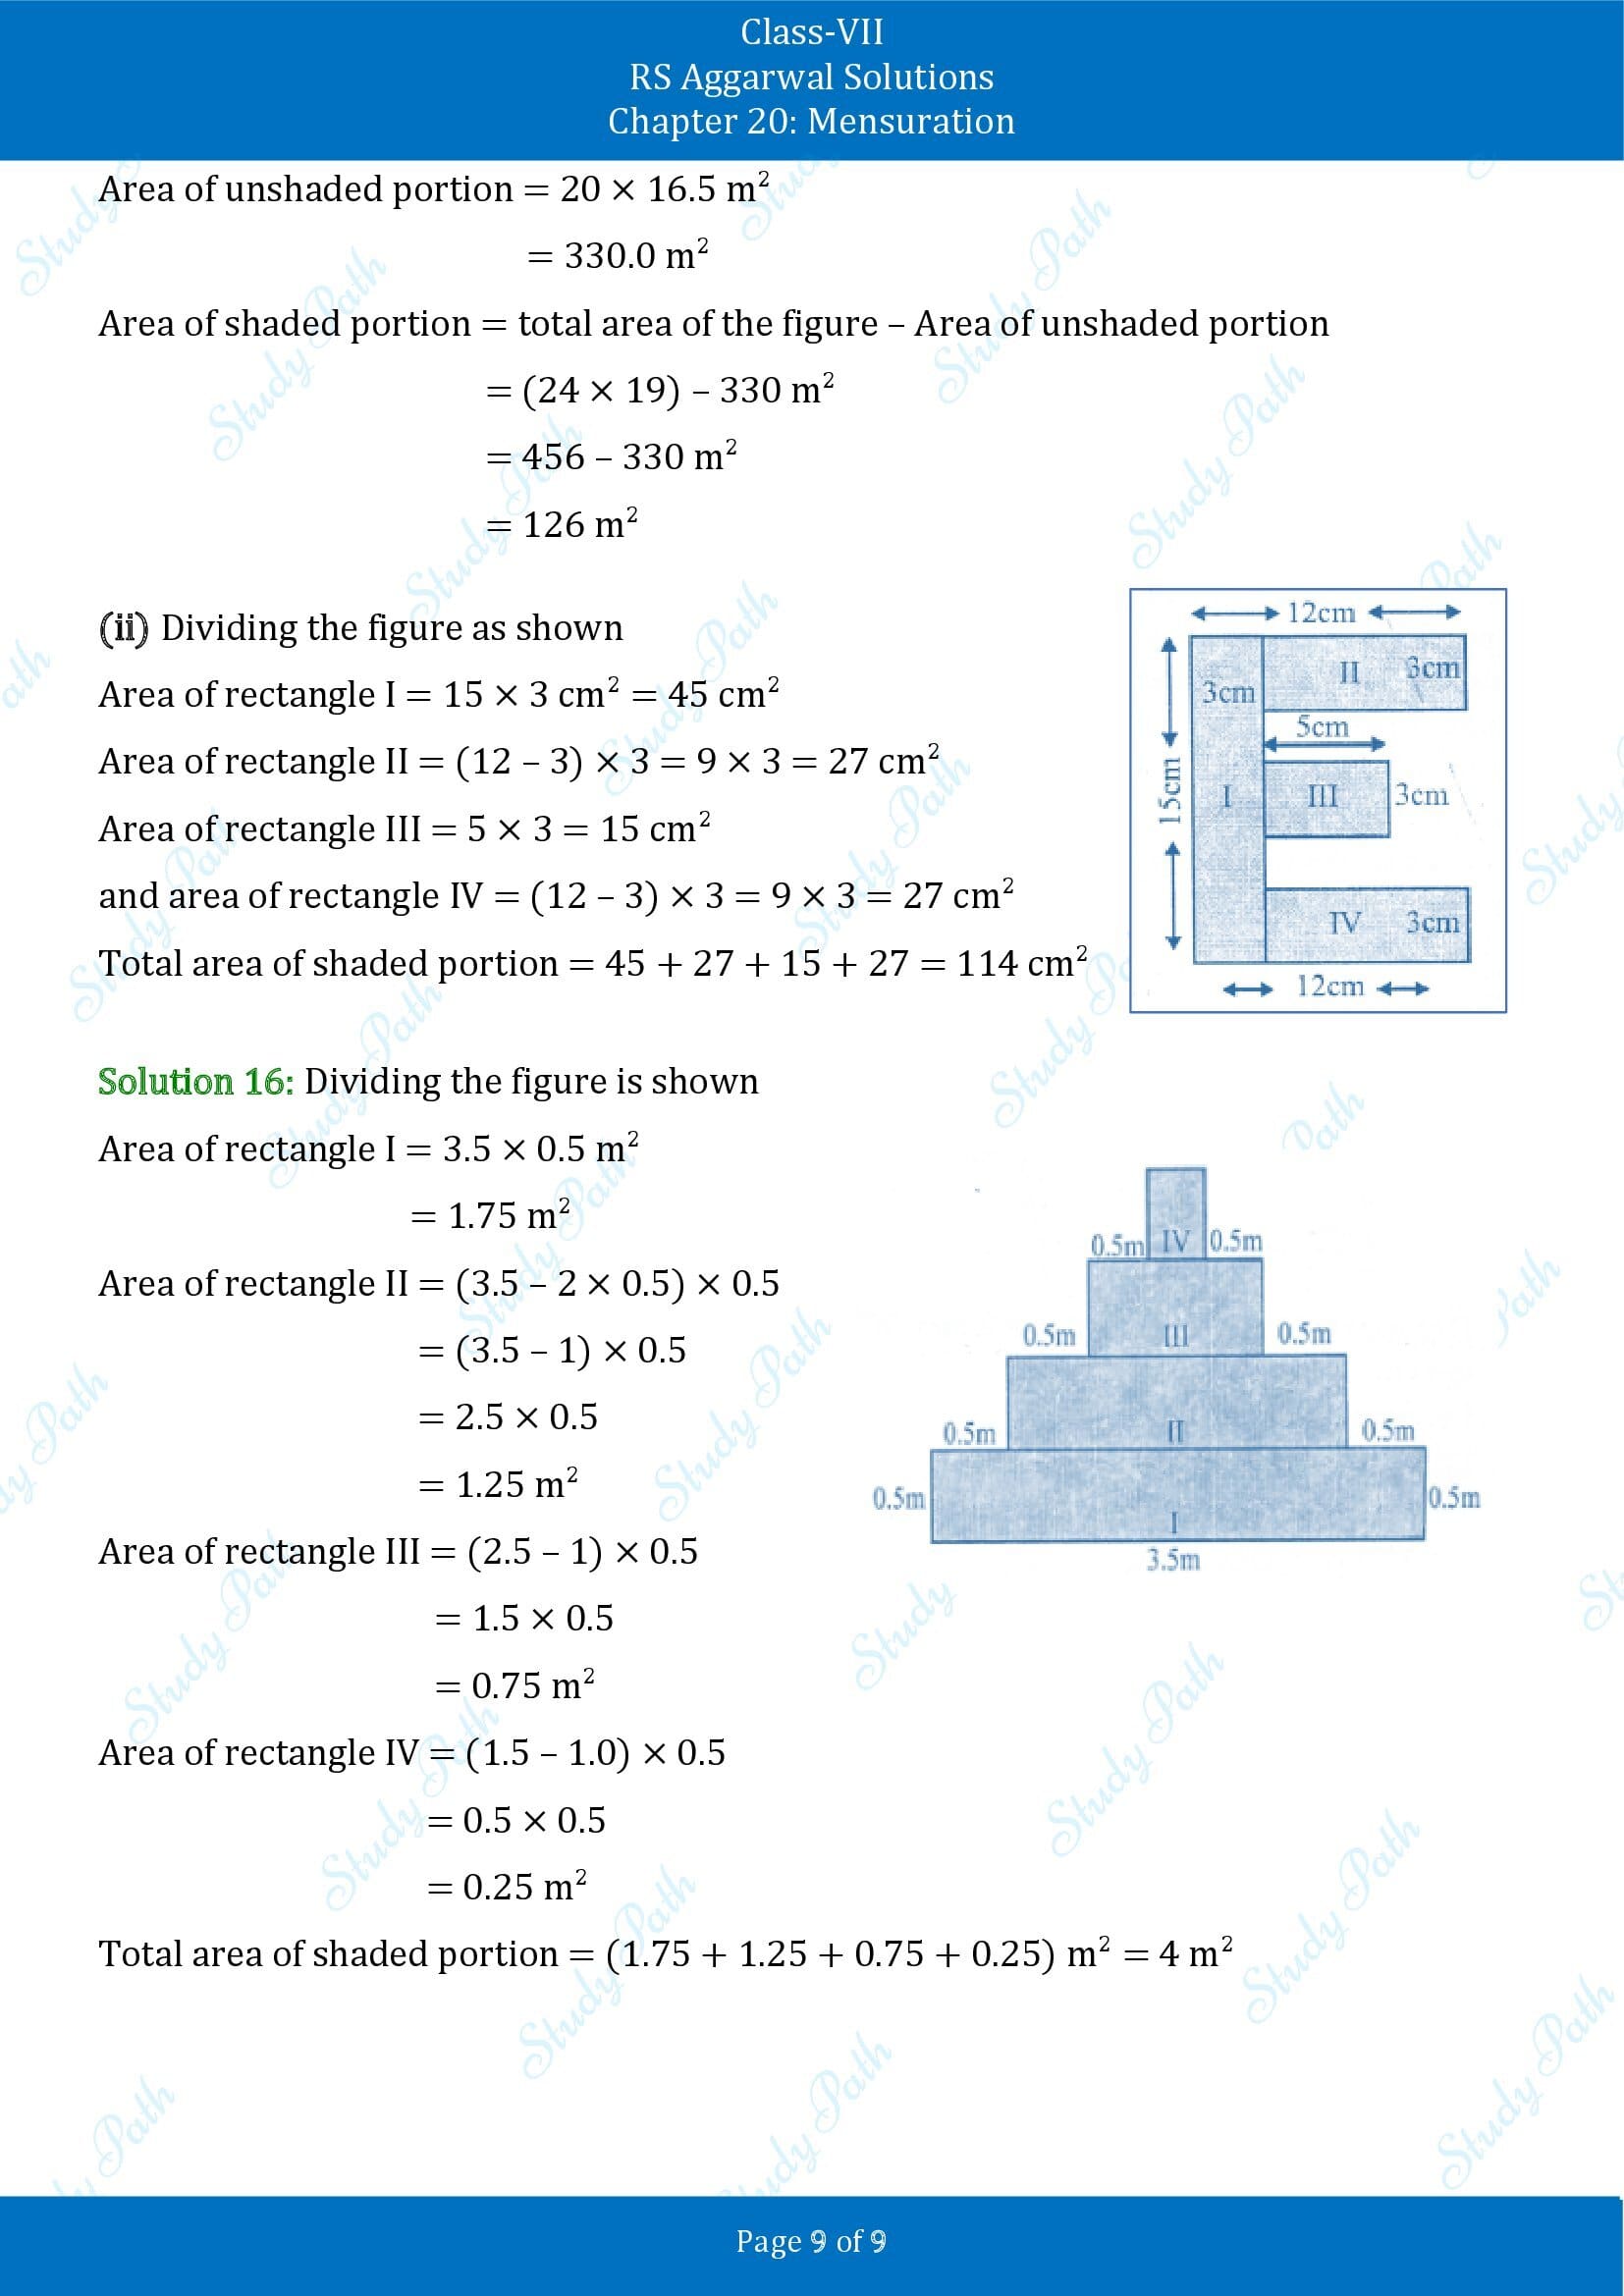 RS Aggarwal Solutions Class 7 Chapter 20 Mensuration Exercise 20B 00009